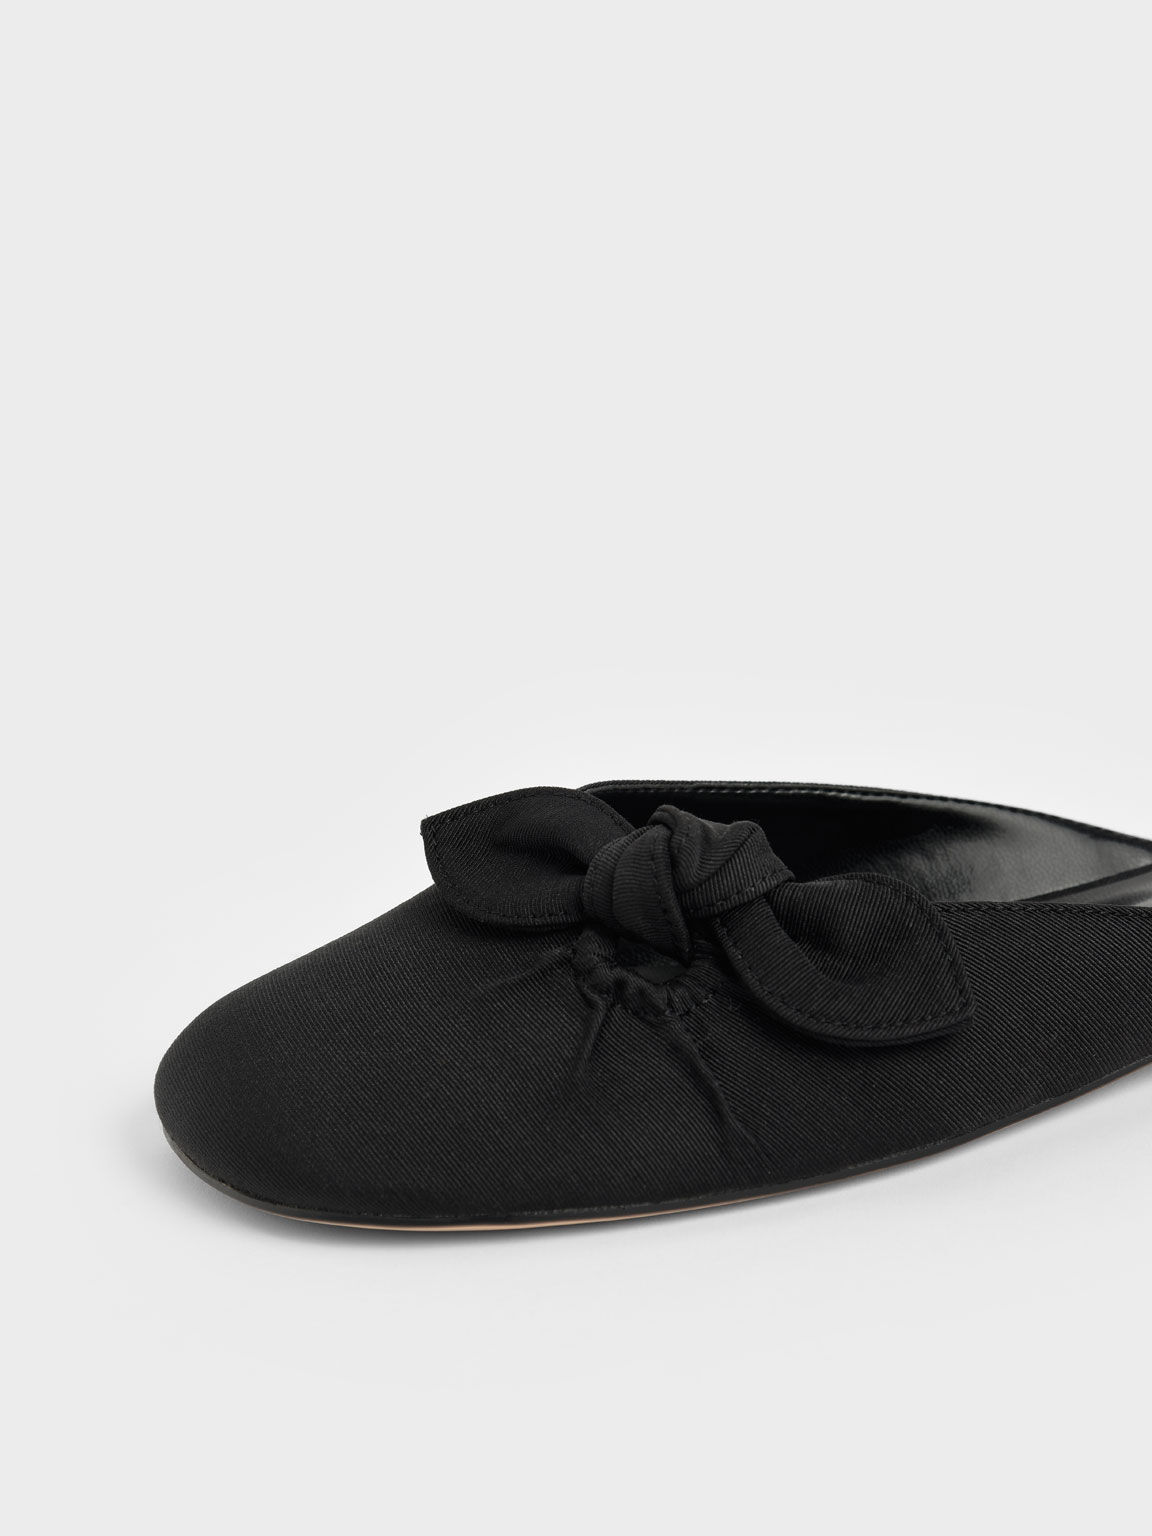 Knotted Fabric Mules, Black, hi-res